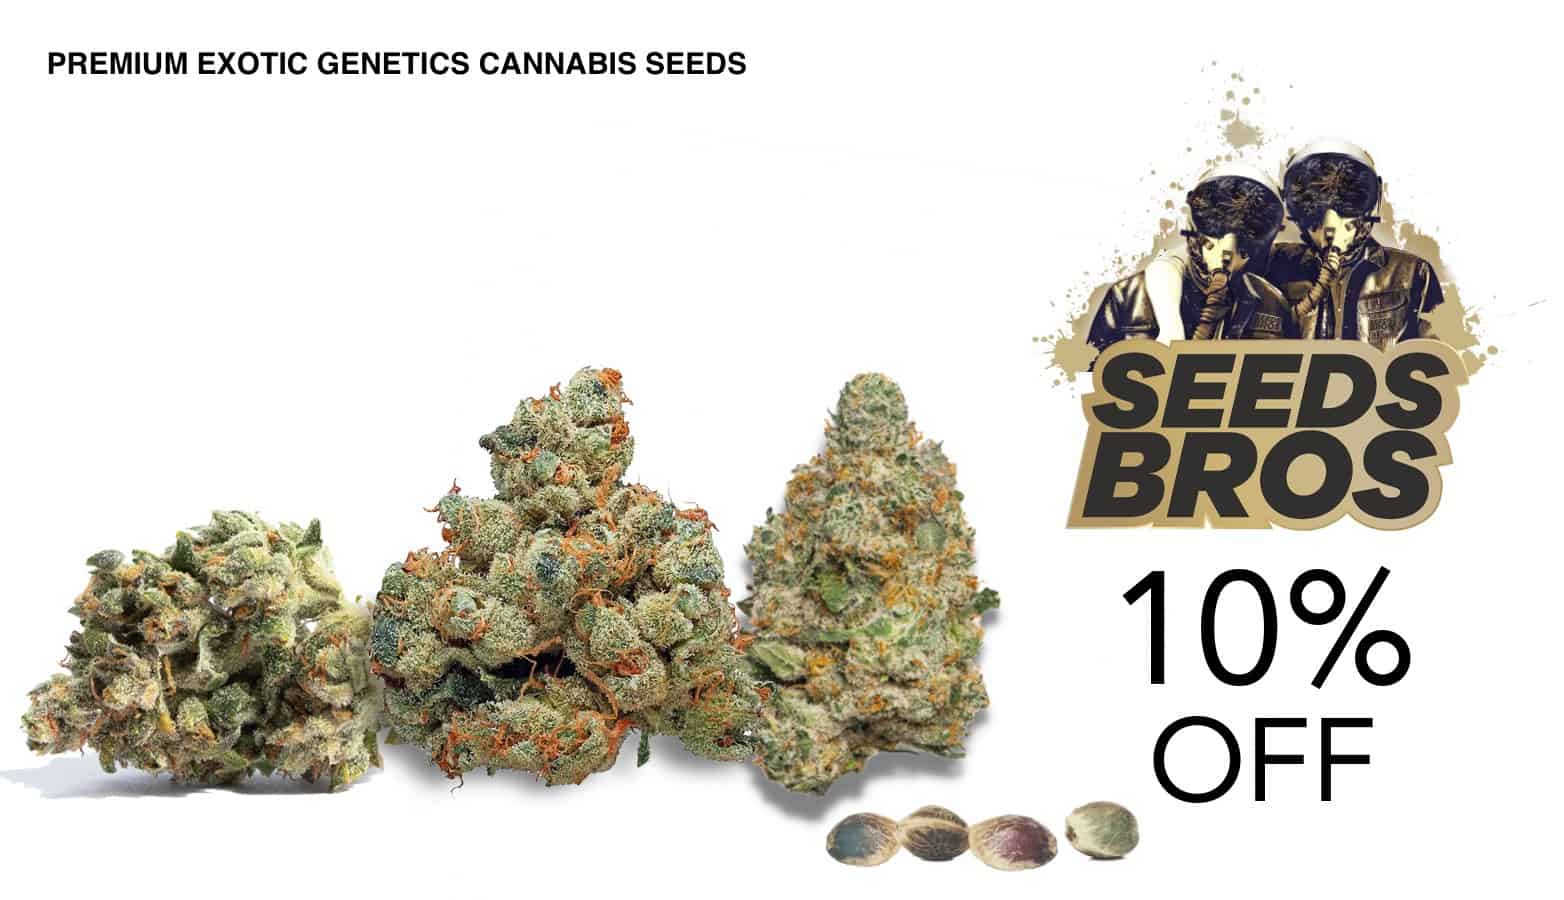 SEEDS BROS Discount Code - Save On Cannabis